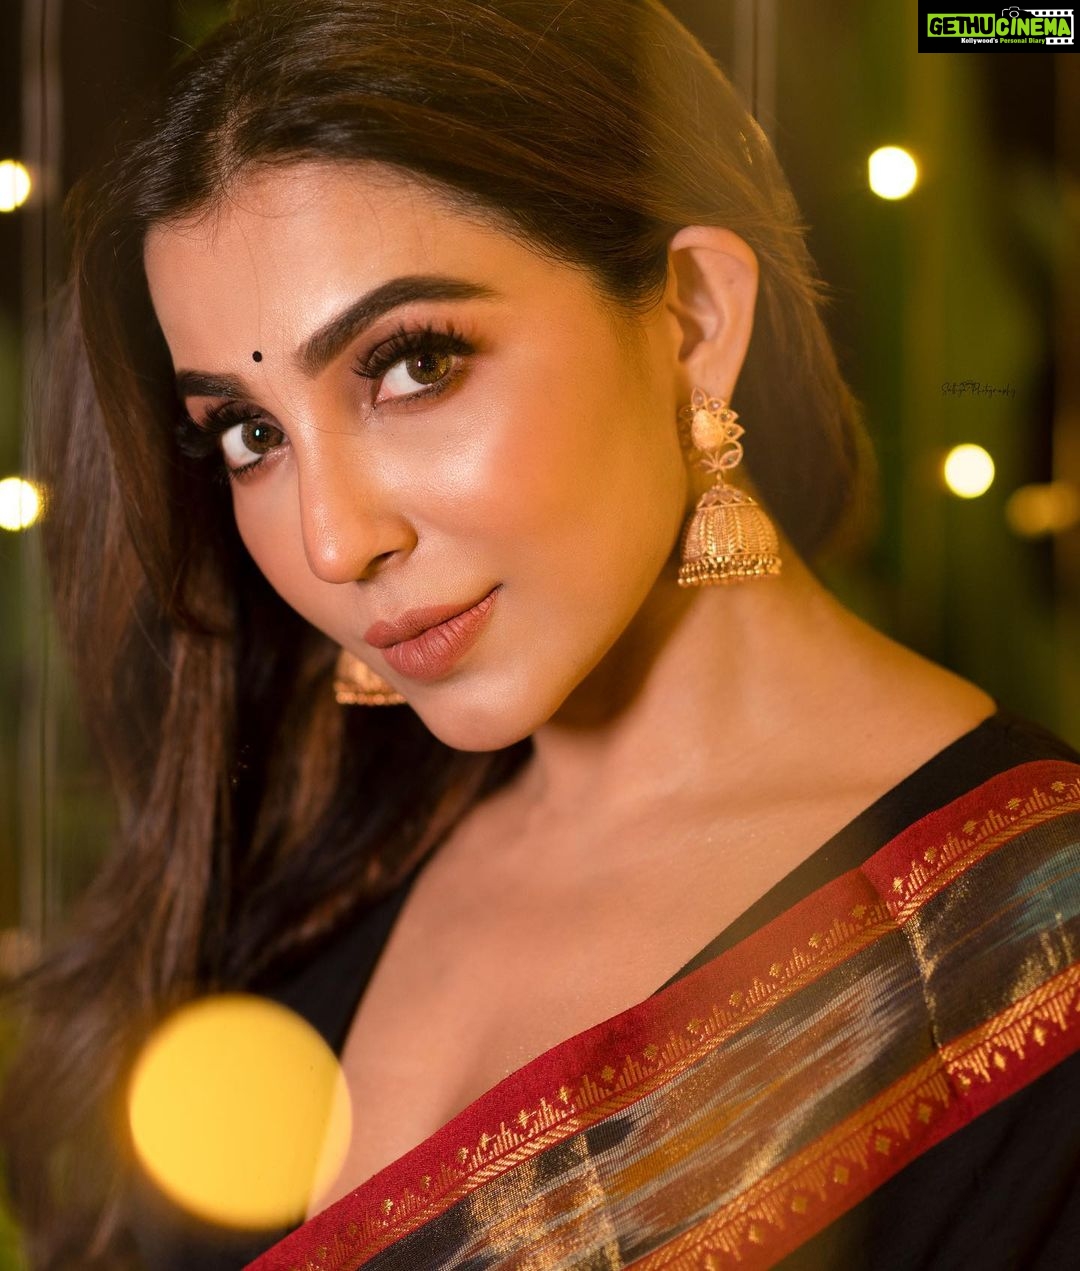 Parvatii Nair - 125.6K Likes - Most Liked Instagram Photos